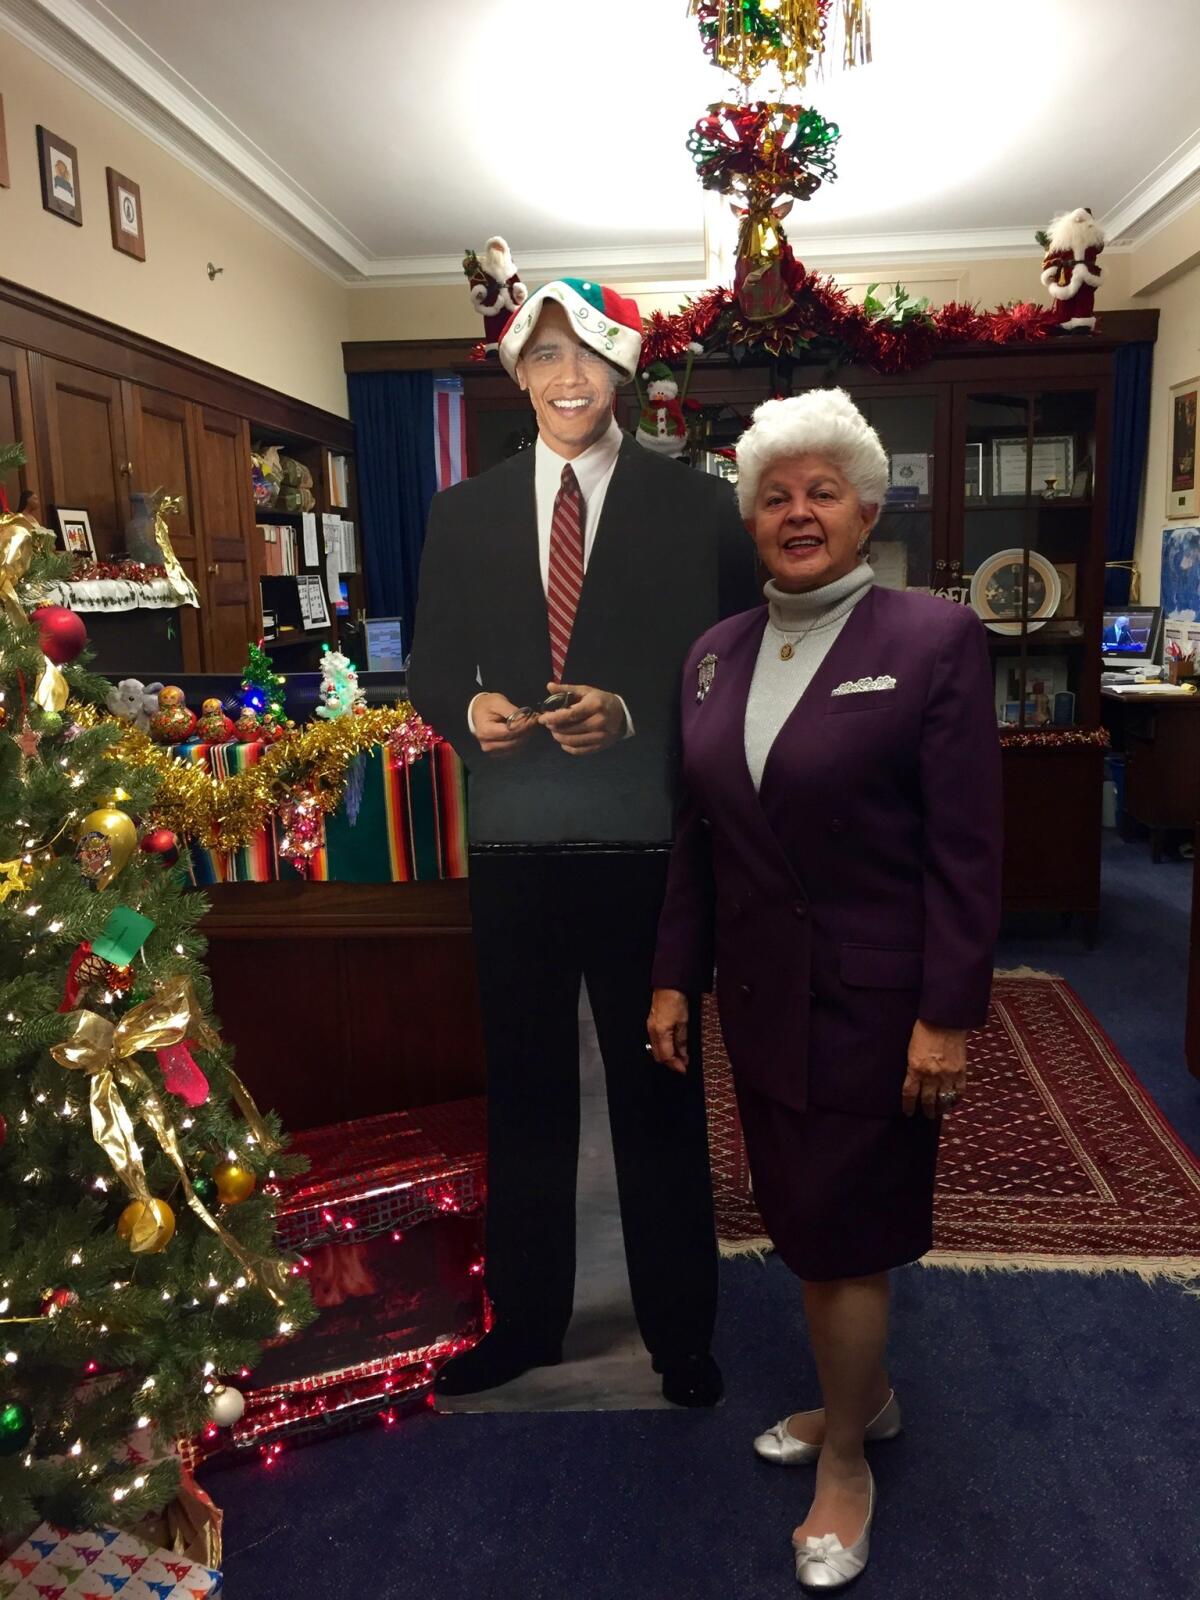 Rep. Grace Napolitano (D-Norwalk) shows off Christmas decorations in her office. She said staff and visitors stop in to have their photo taken with the cutout of President Obama in a Santa hat.